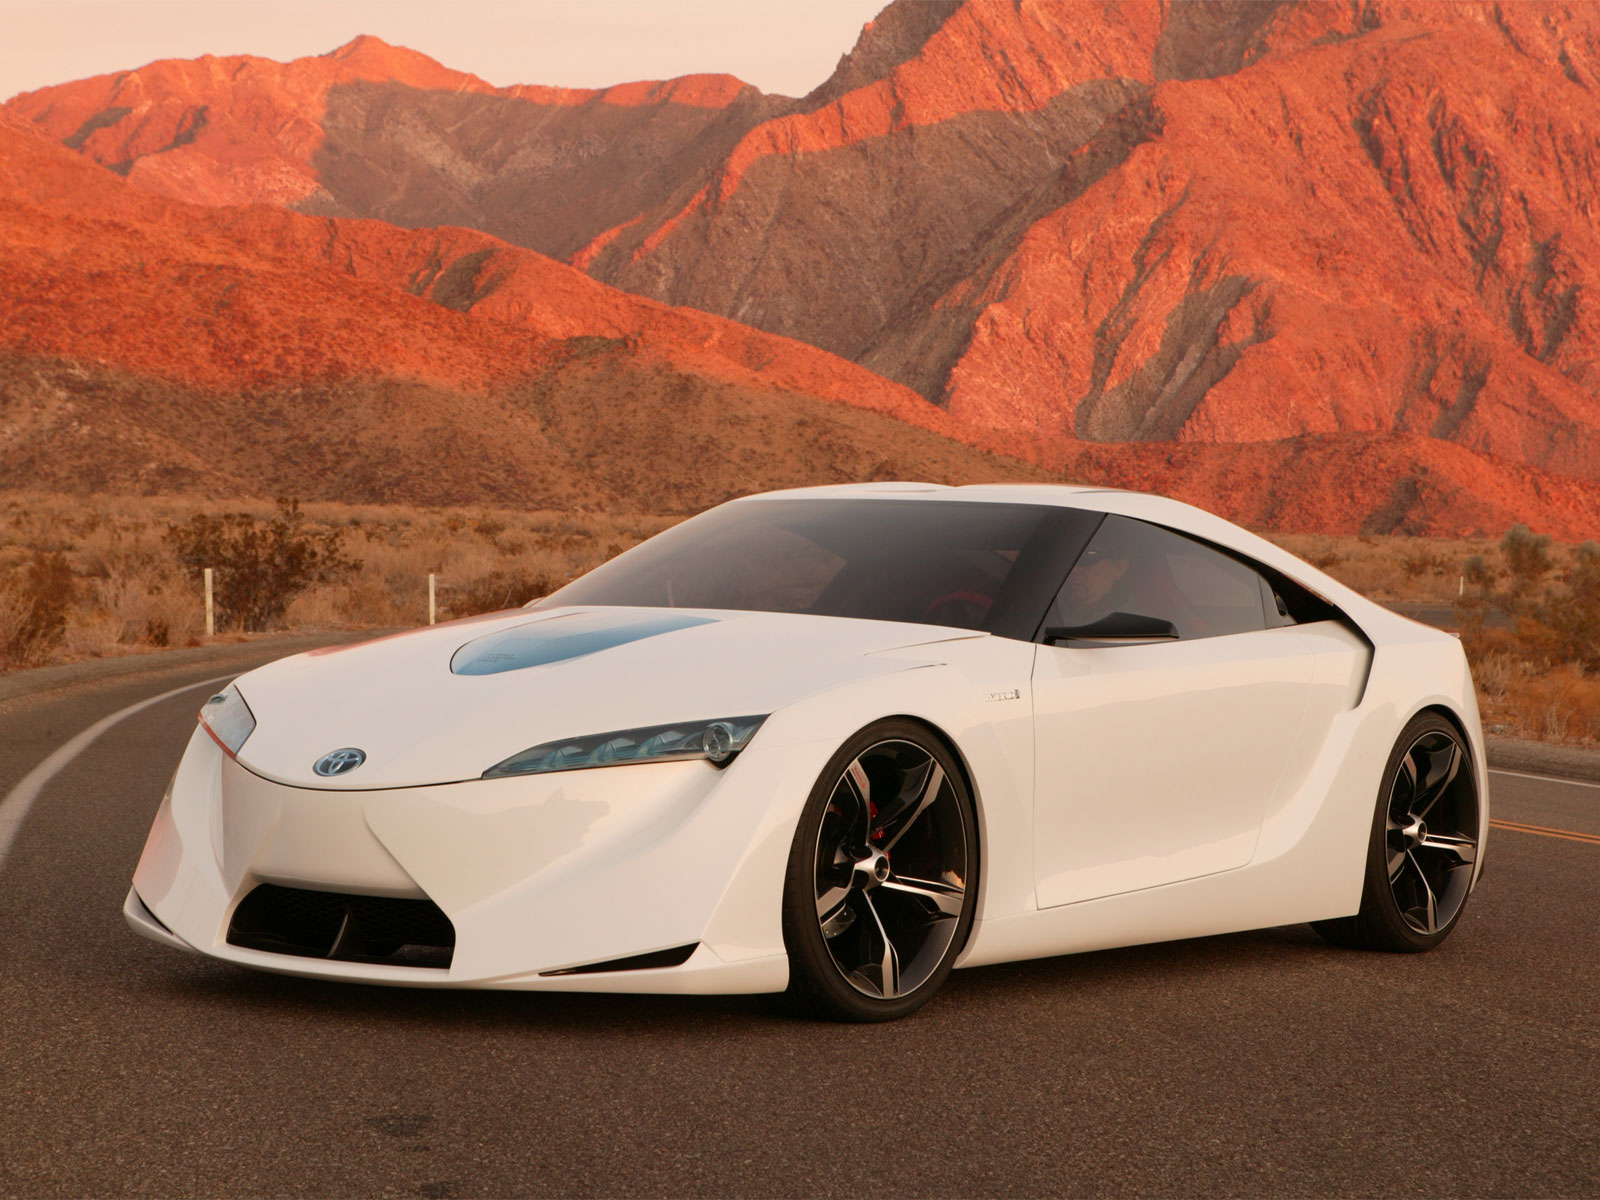 2007, Toyota, Ft hs, Concept, Supercar, Supercars Wallpapers HD